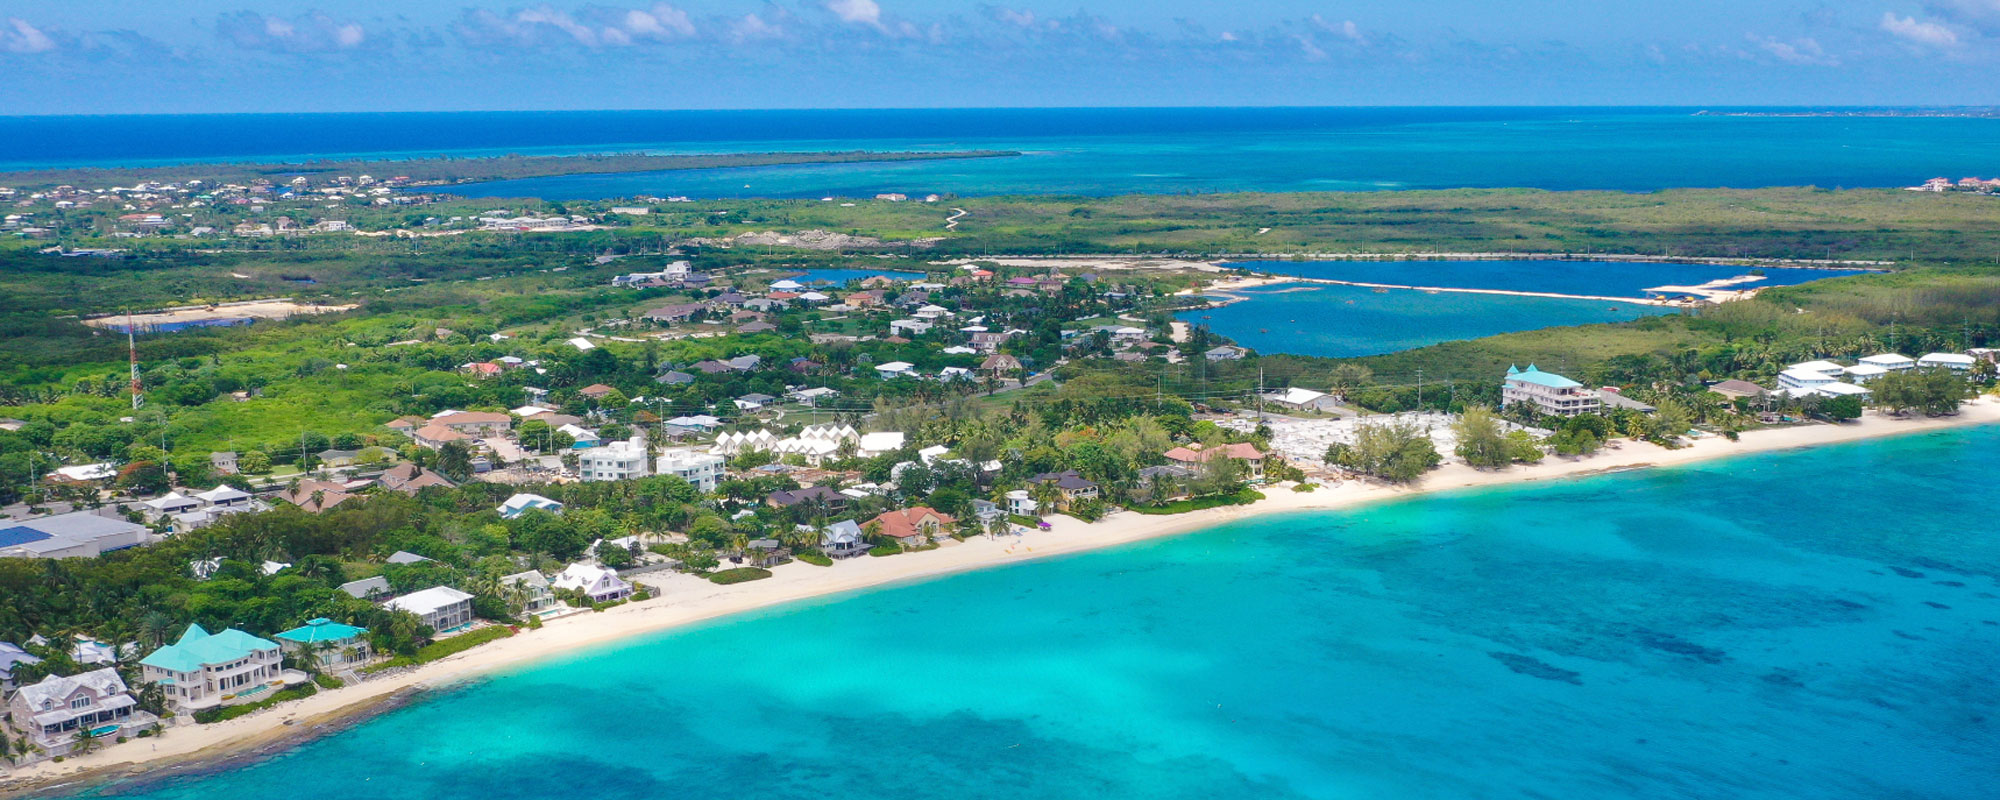 The Best Developments to Buy a Cayman Vacation Home